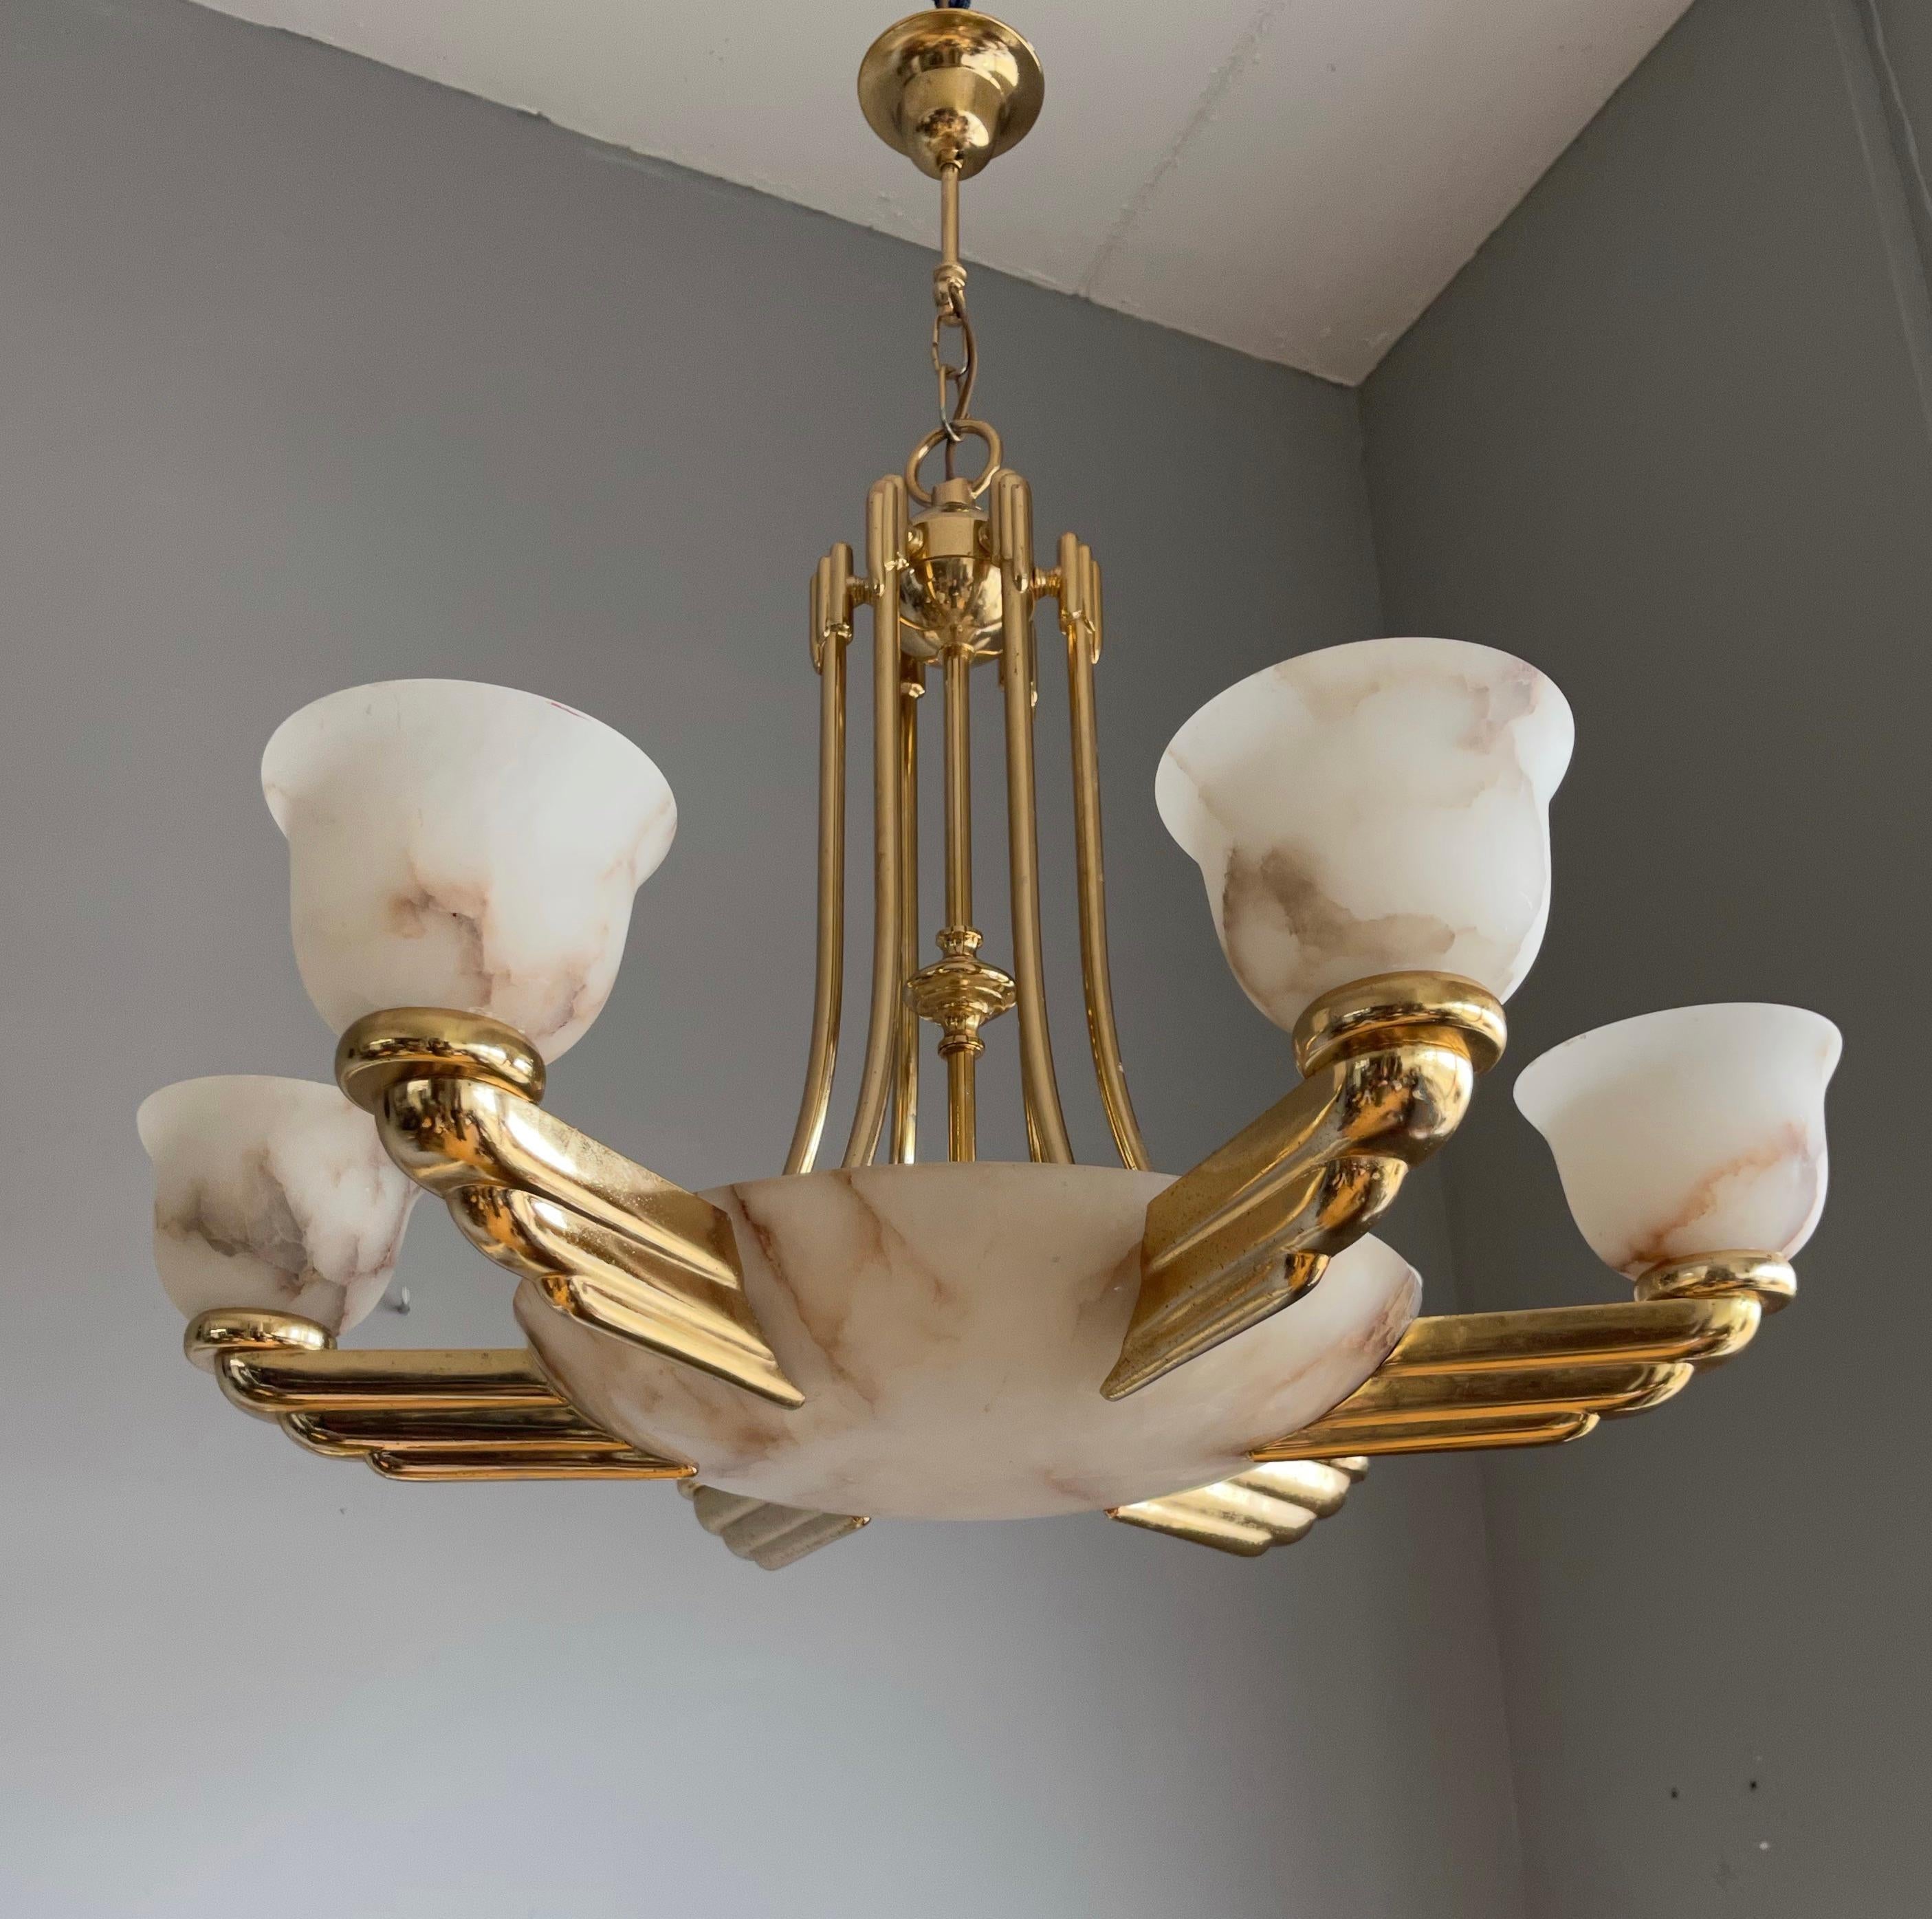 Striking and exclusive, 1970s made light fixture for the perfect Deco atmosphere.

If you are looking for a remarkable light fixture to grace your living space then this vintage Art Deco style chandelier from circa 1970 could very well be perfect.